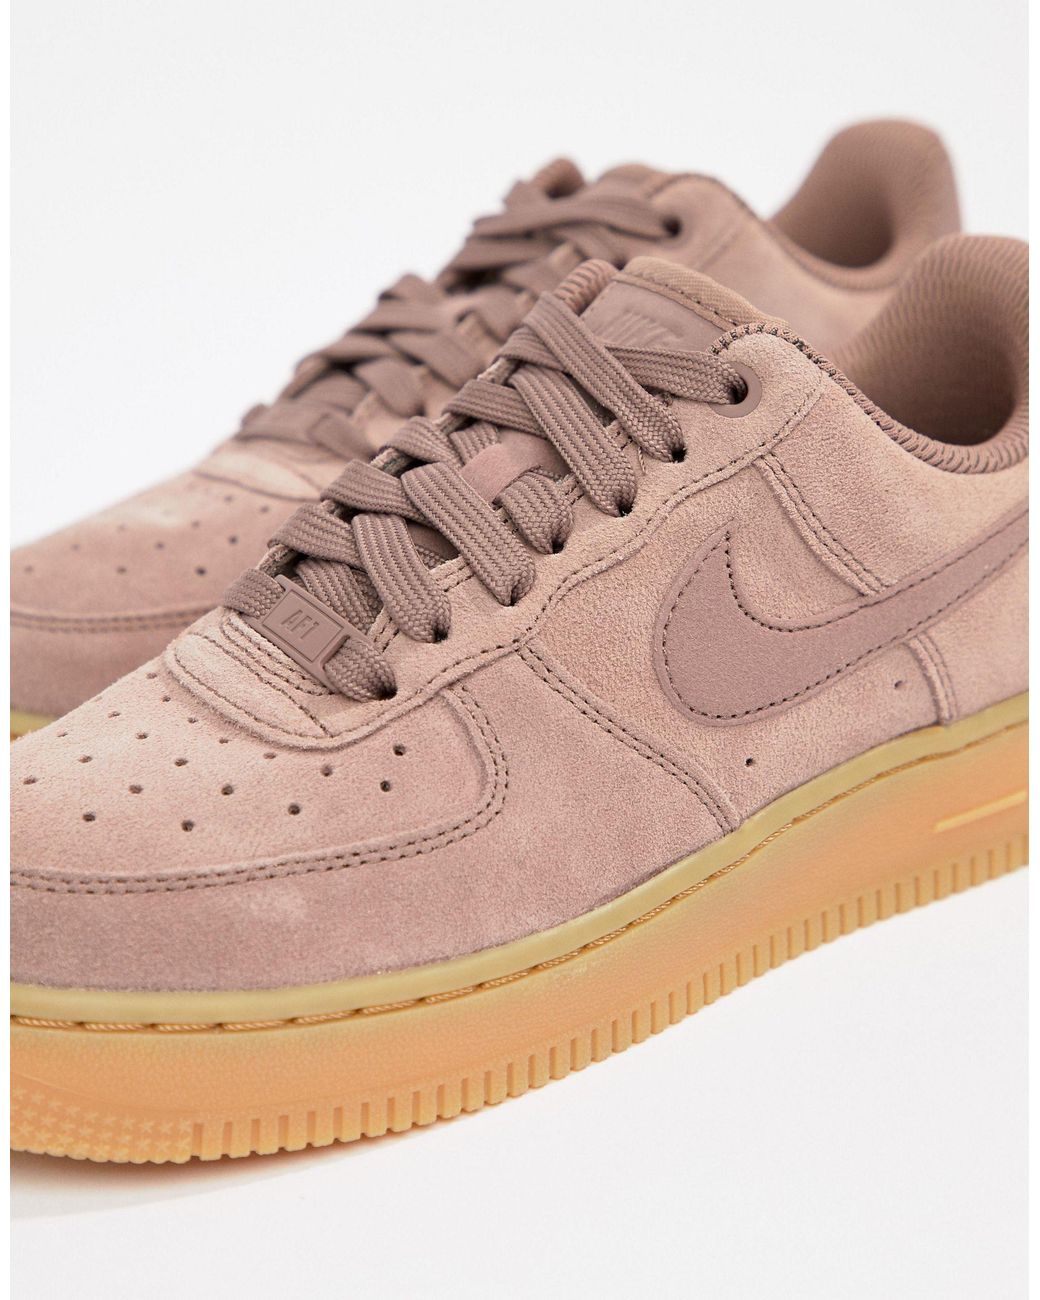 Nike Mauve Air Force 1 Trainers With Gum Sole in Purple | Lyst Canada